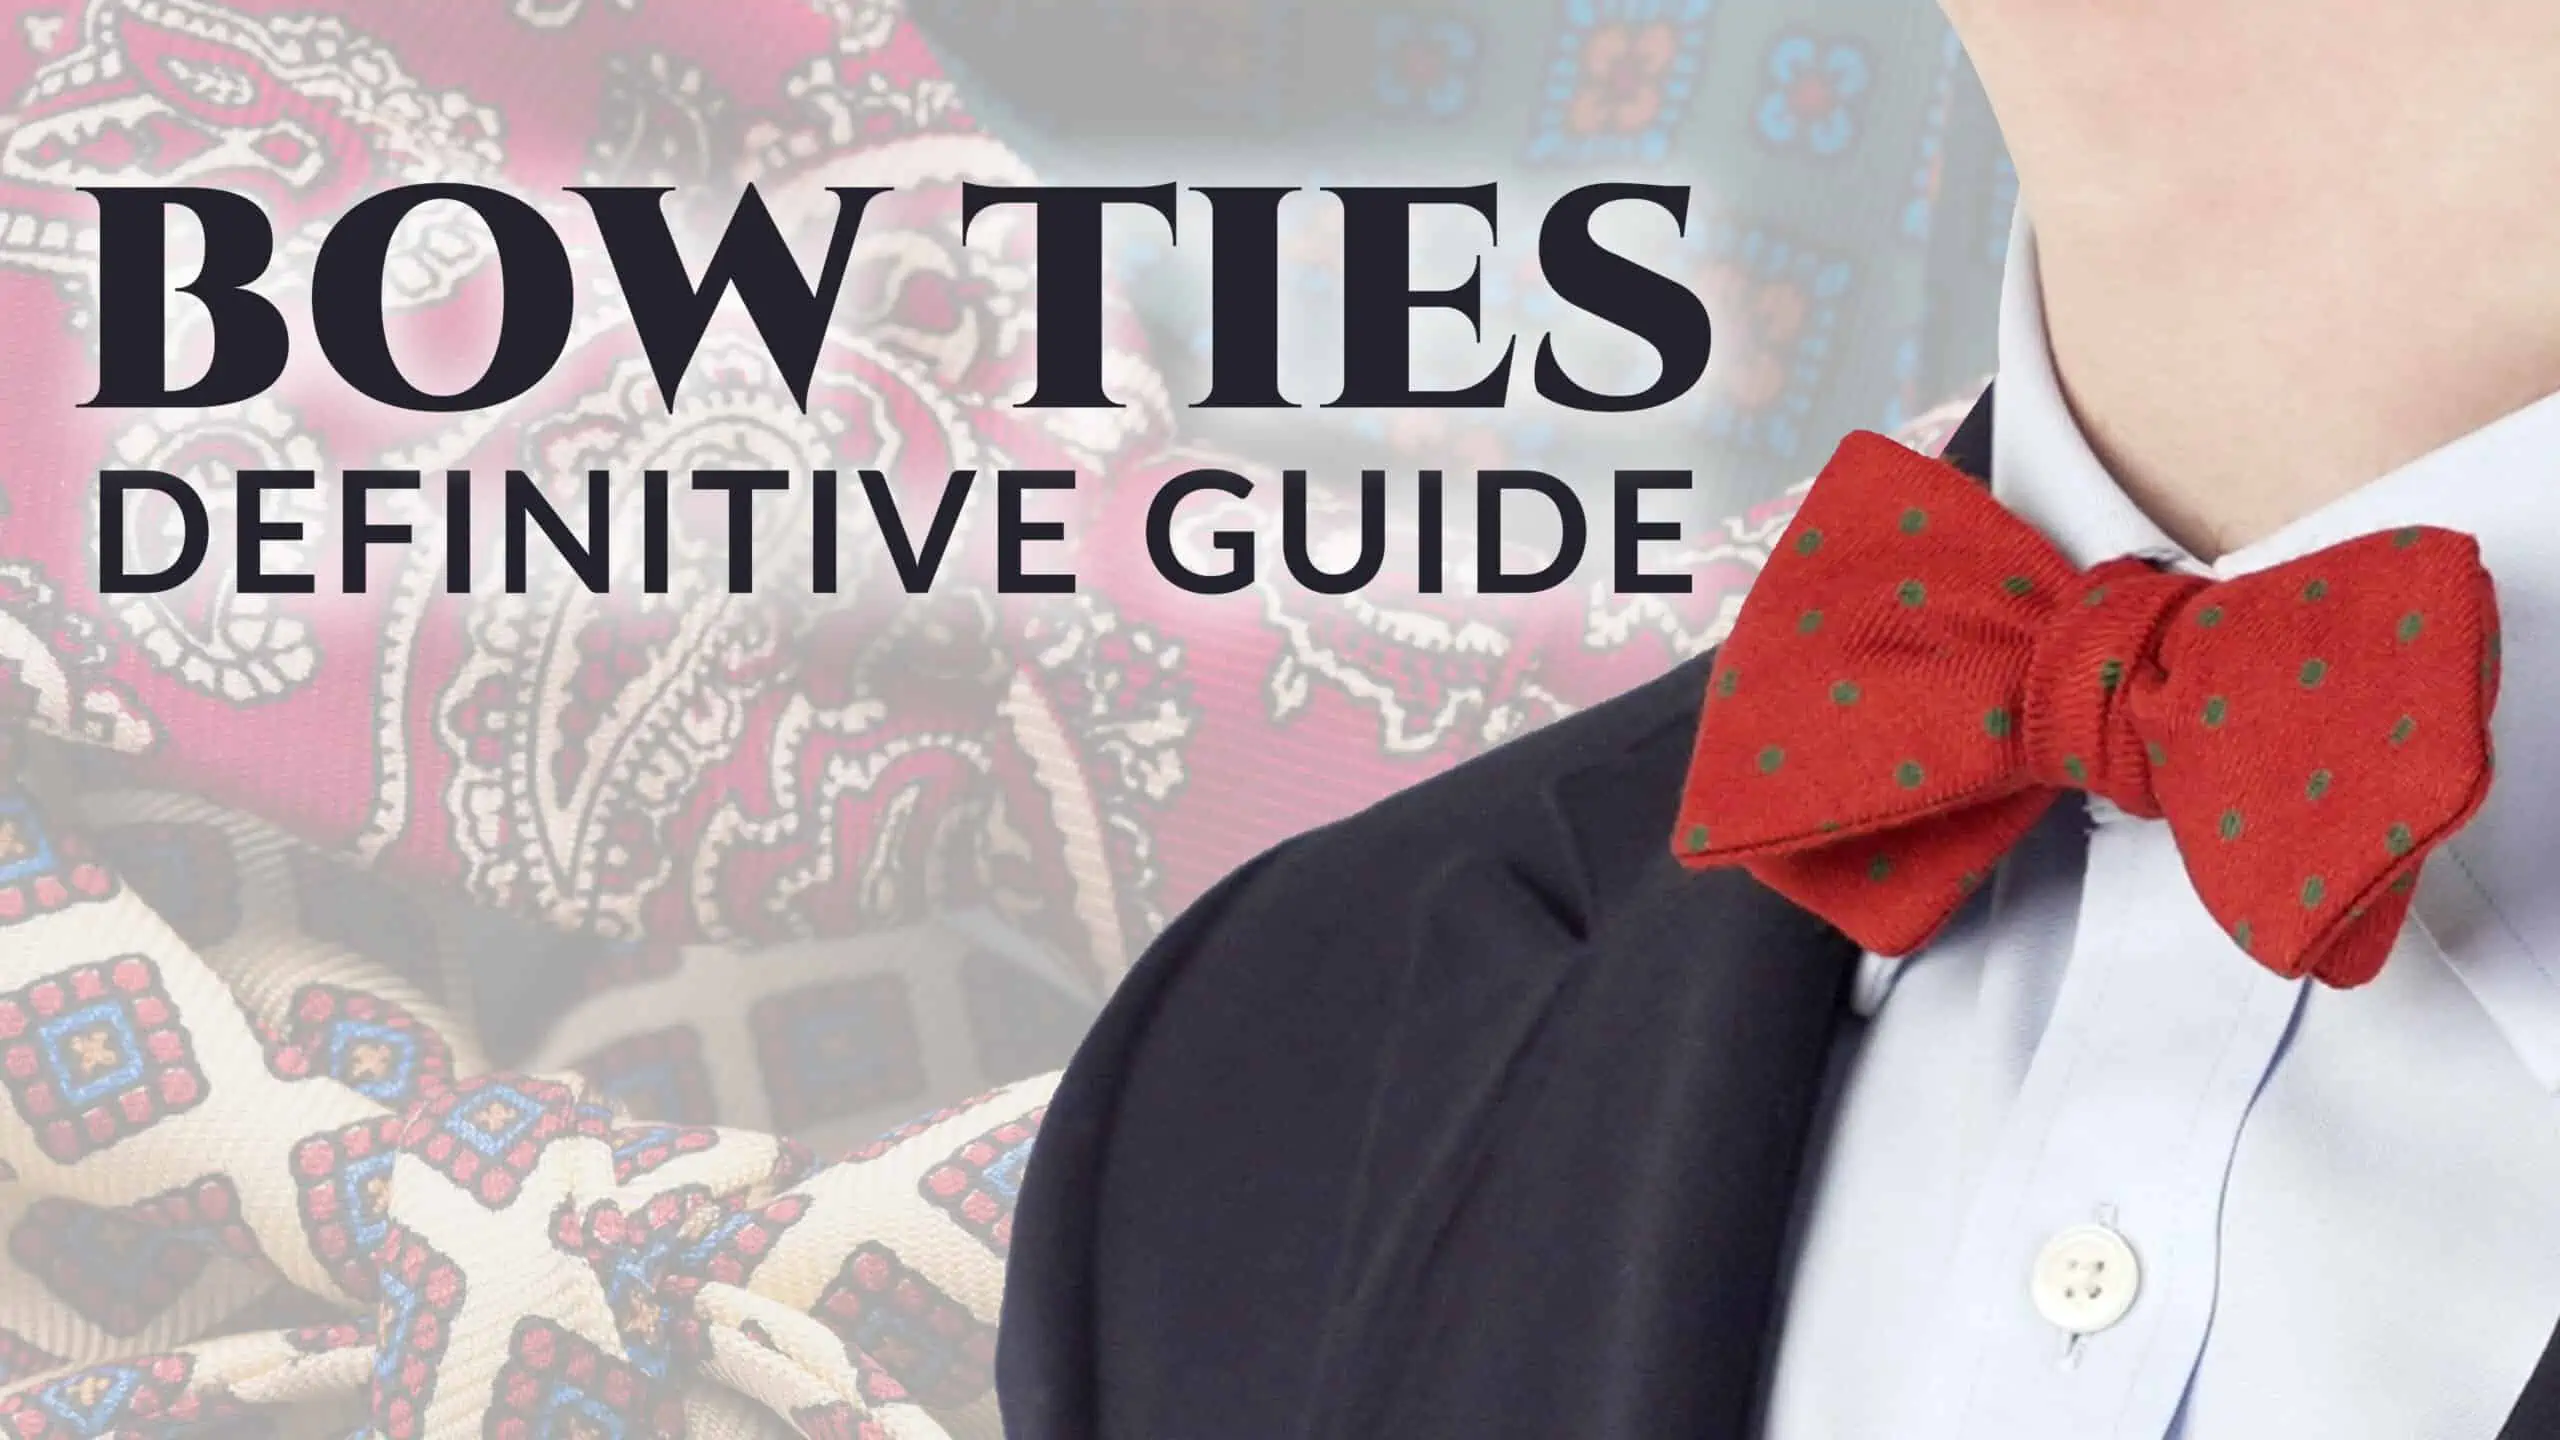 bow ties definitive guide 3840x2160 scaled